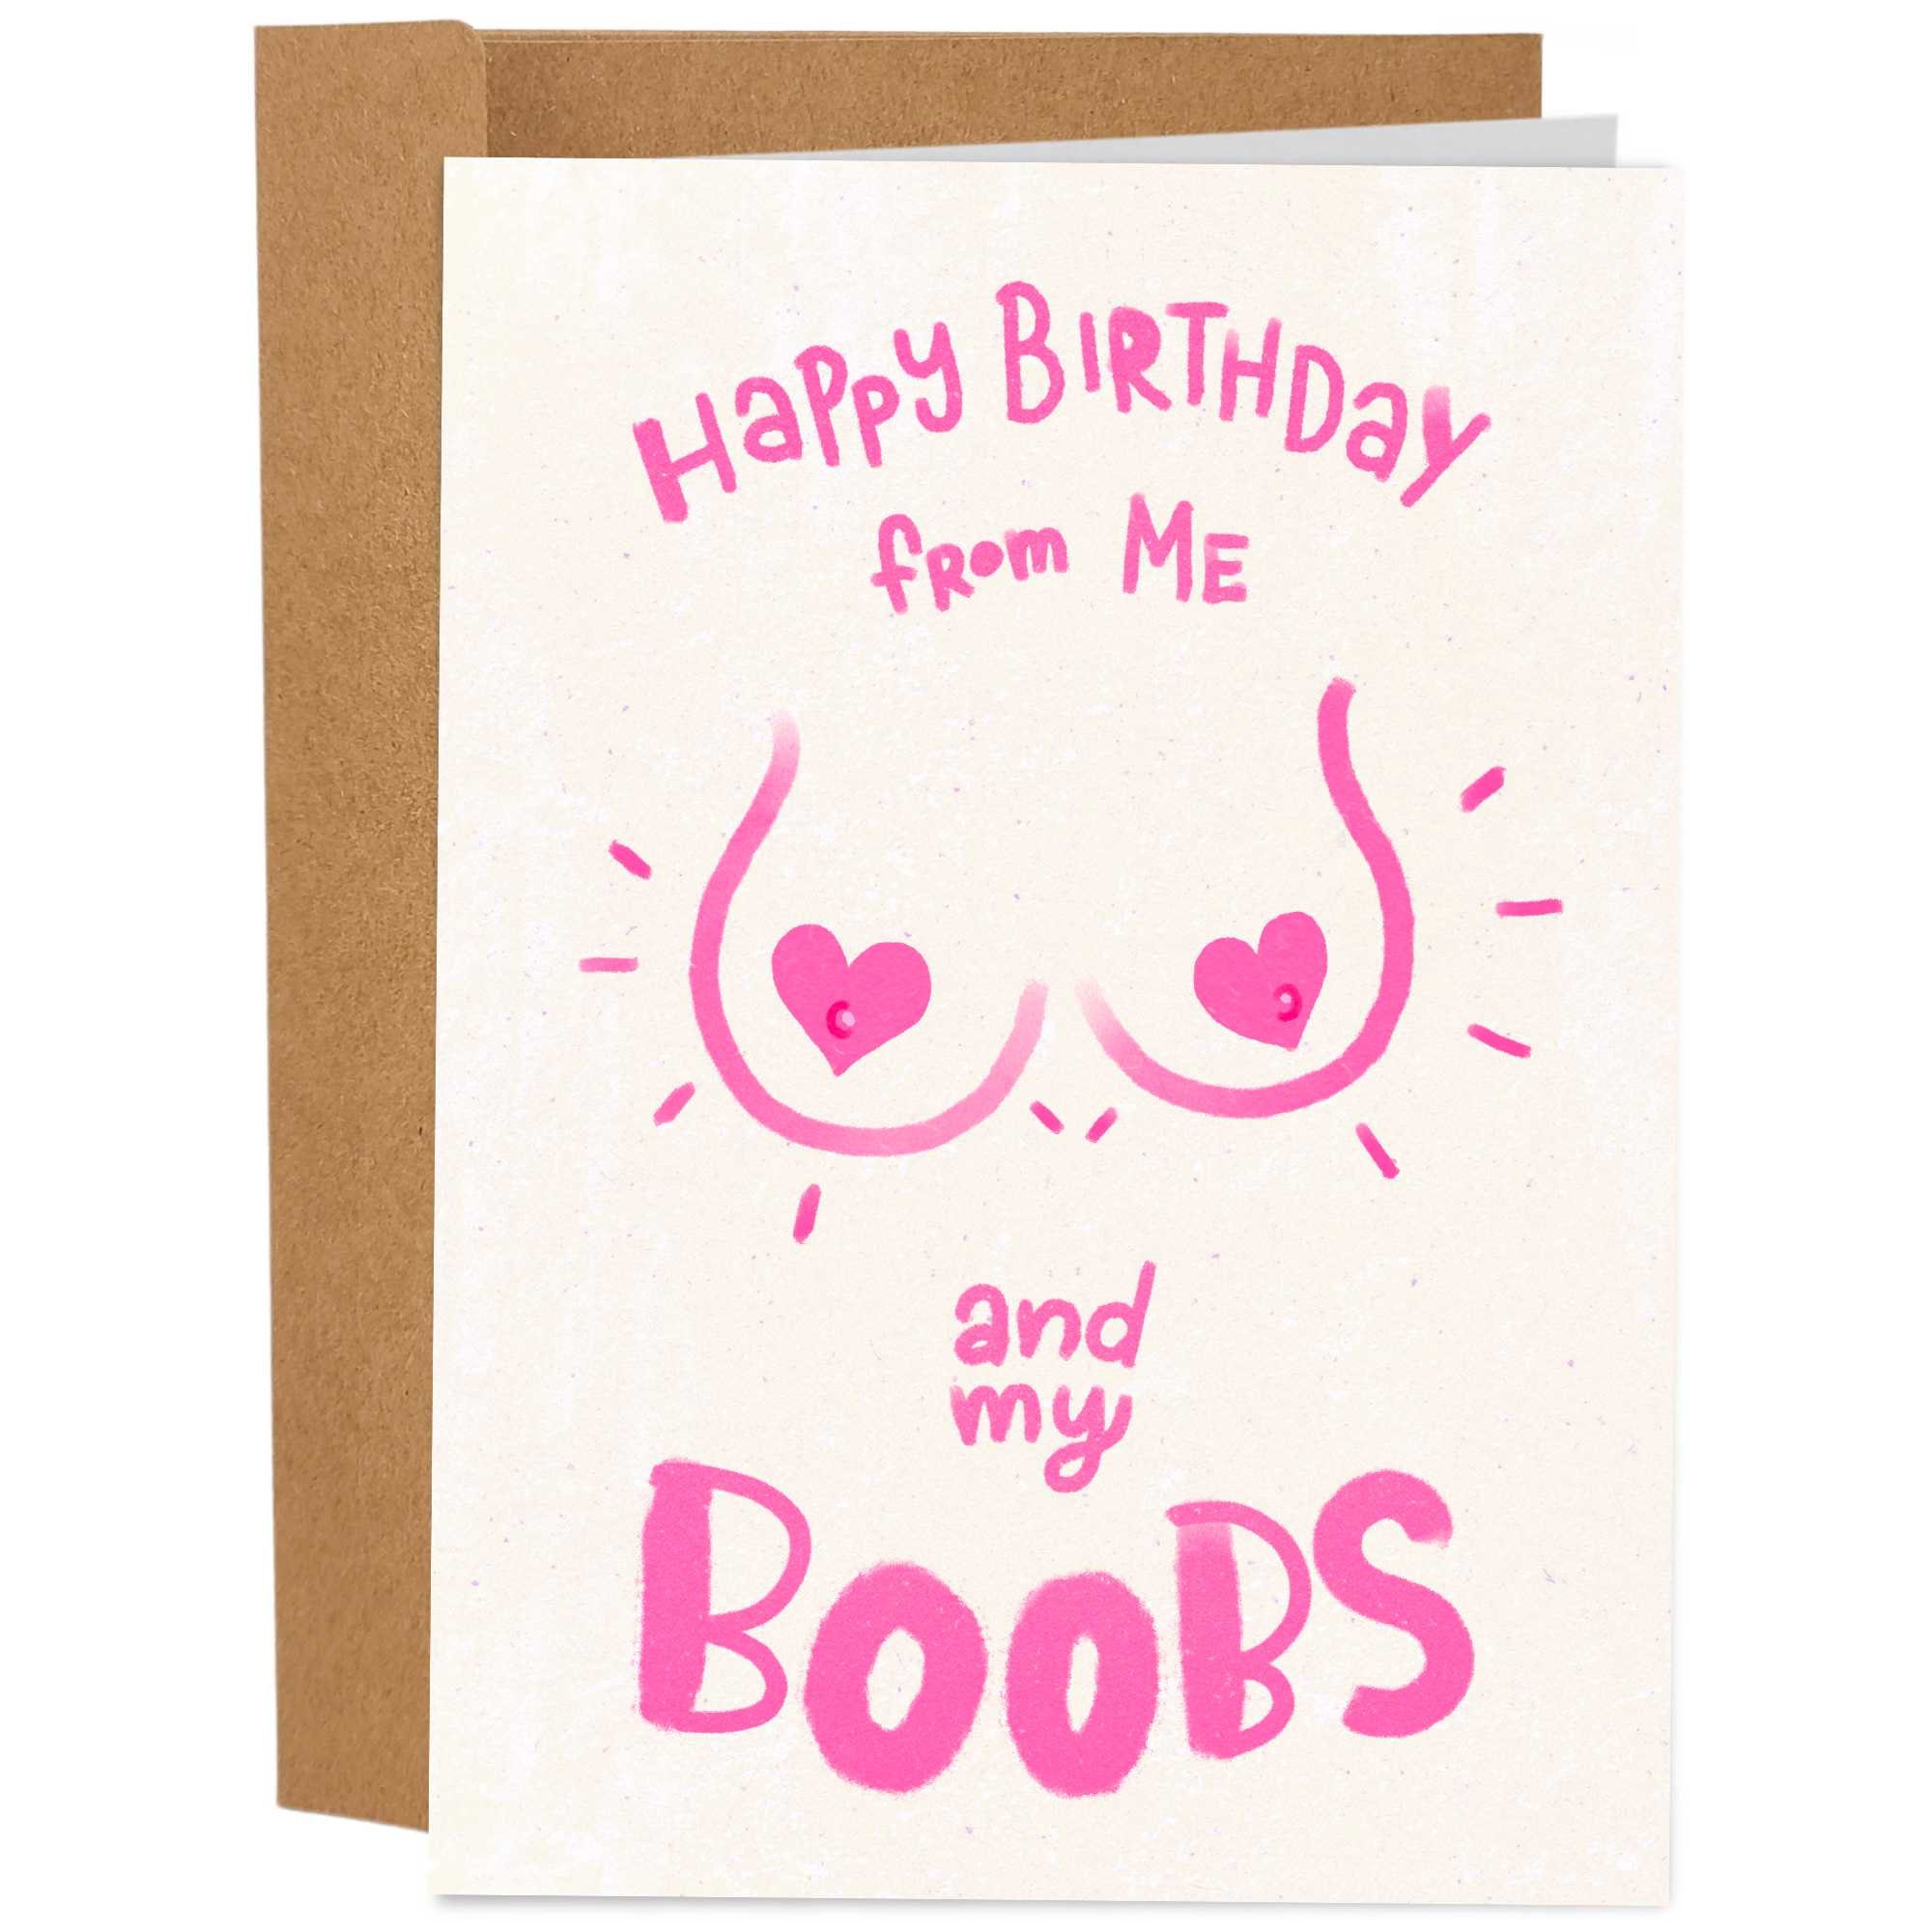 Boobs touch the Seat  Funny Birthday Card for Her - Not Nice Things